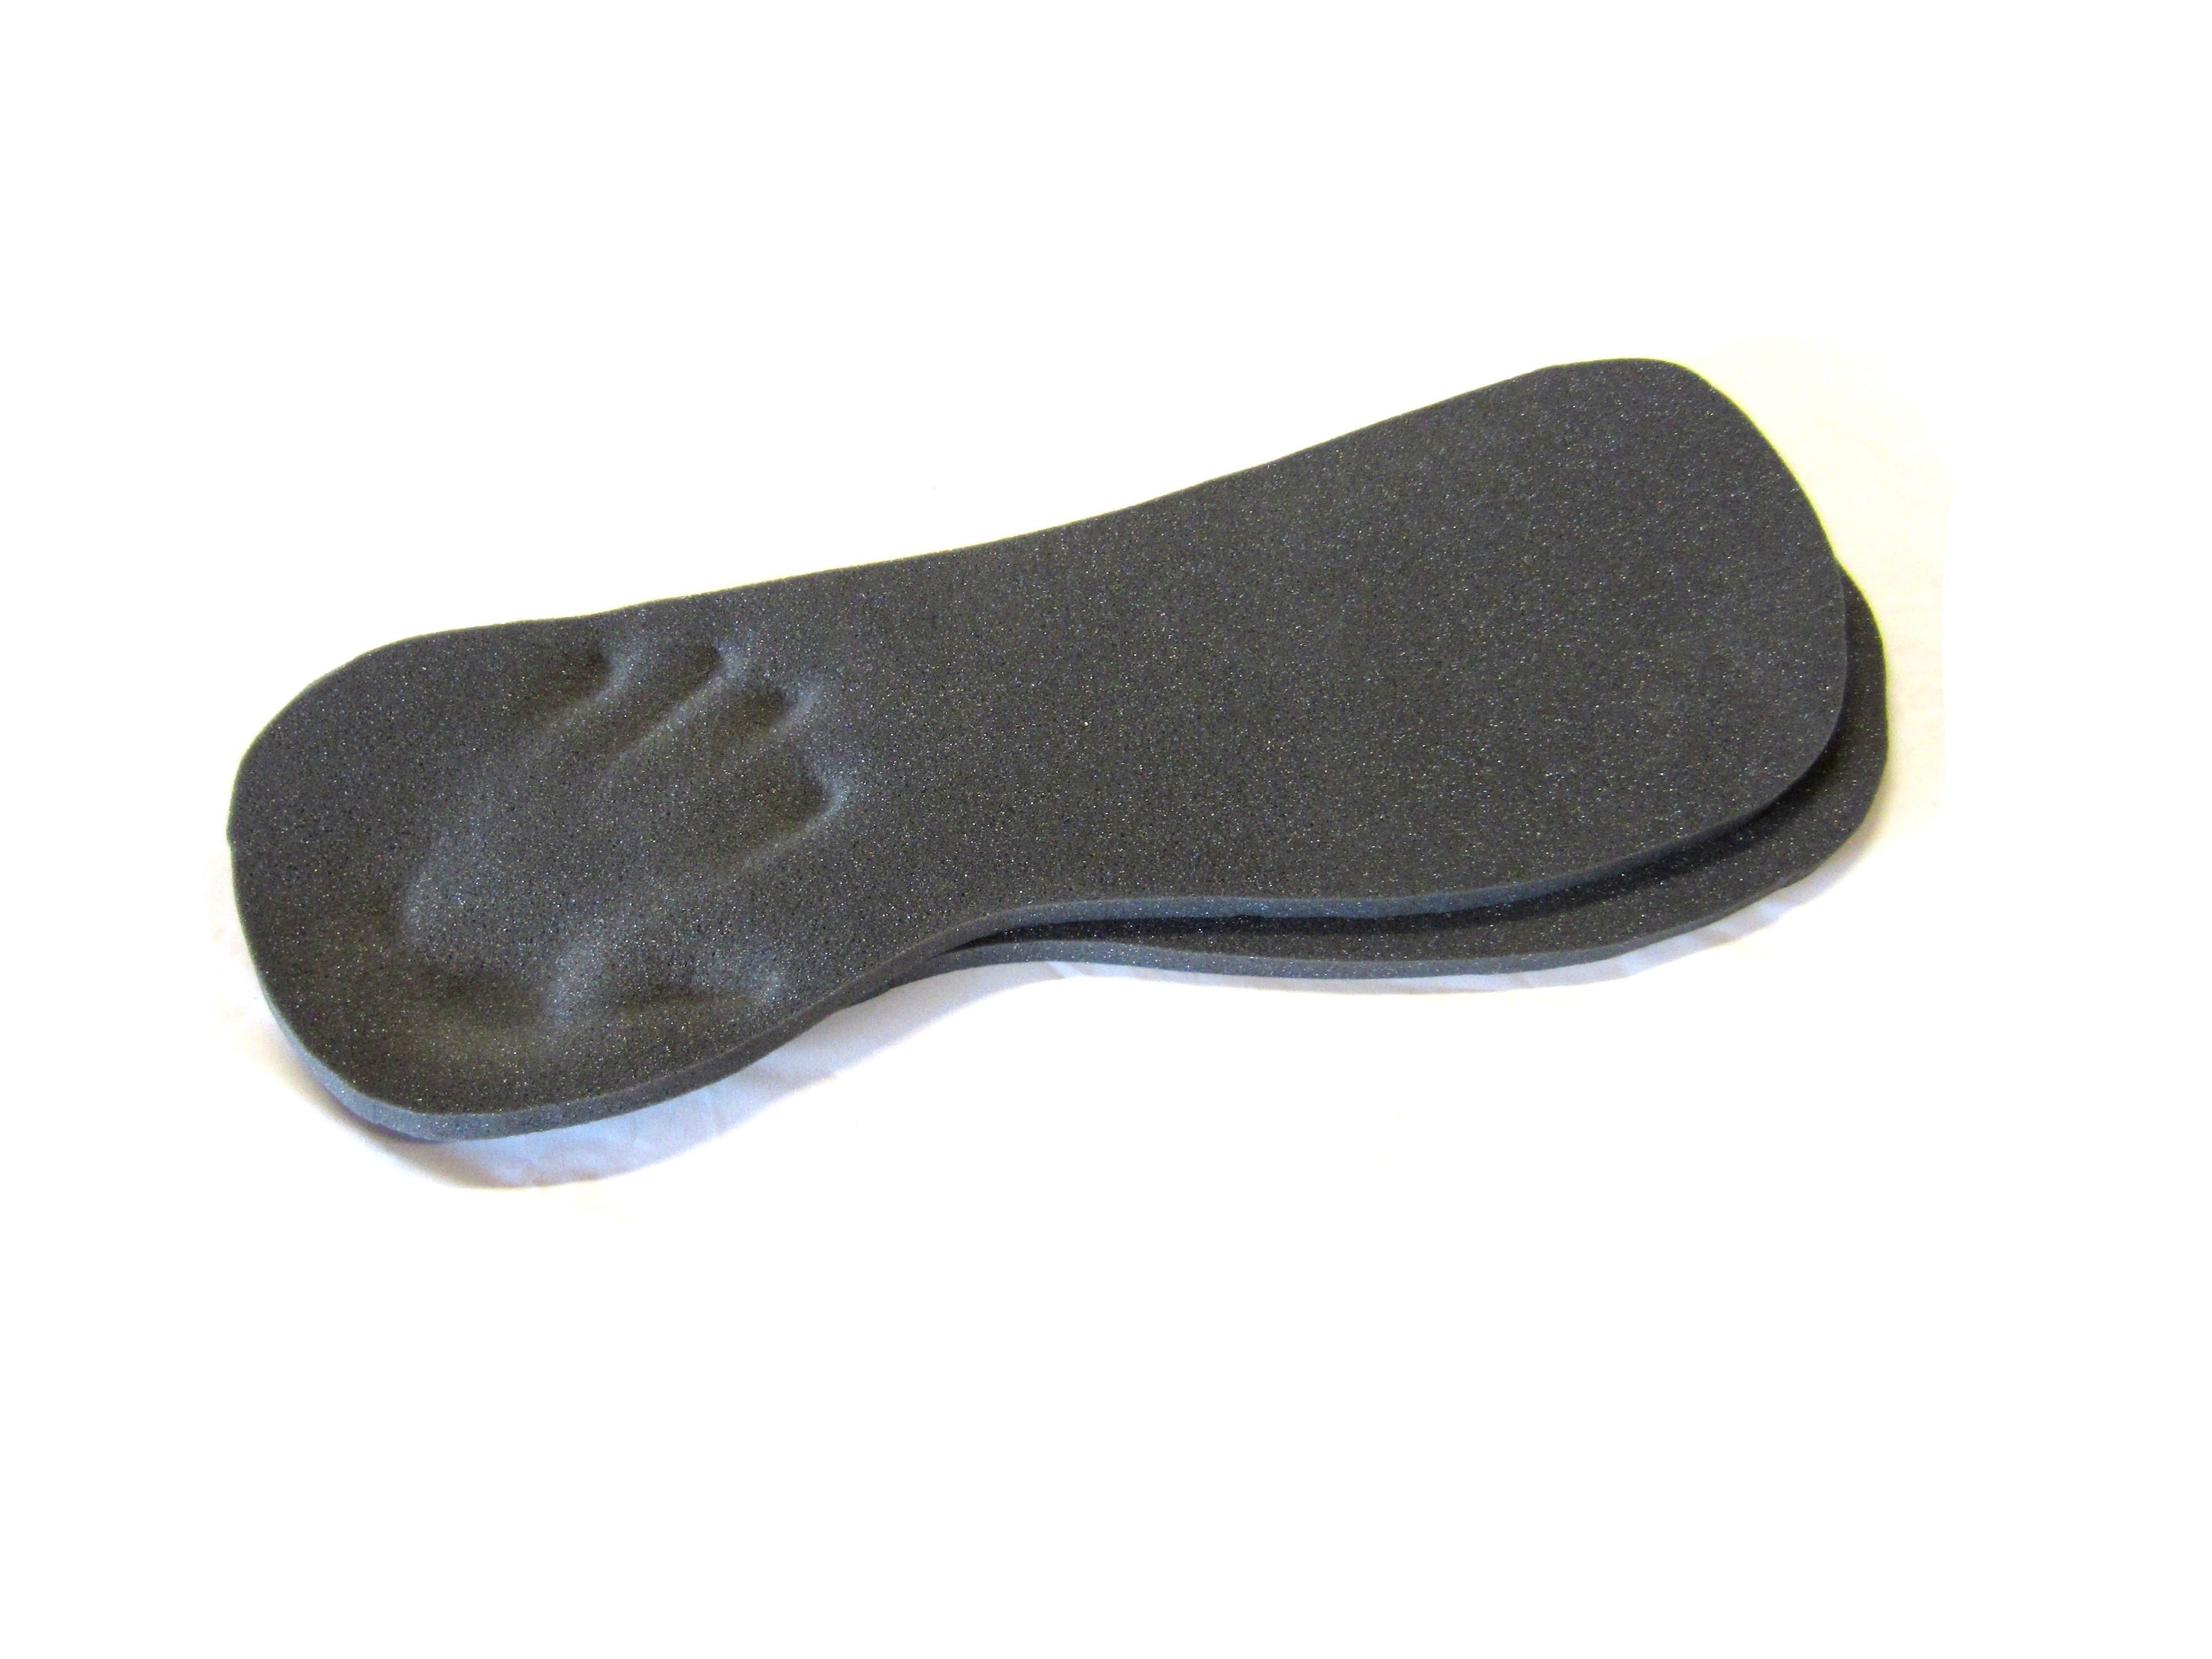 1 pair of memory foam inserts standard shape 15mm high for saddle pads or pads